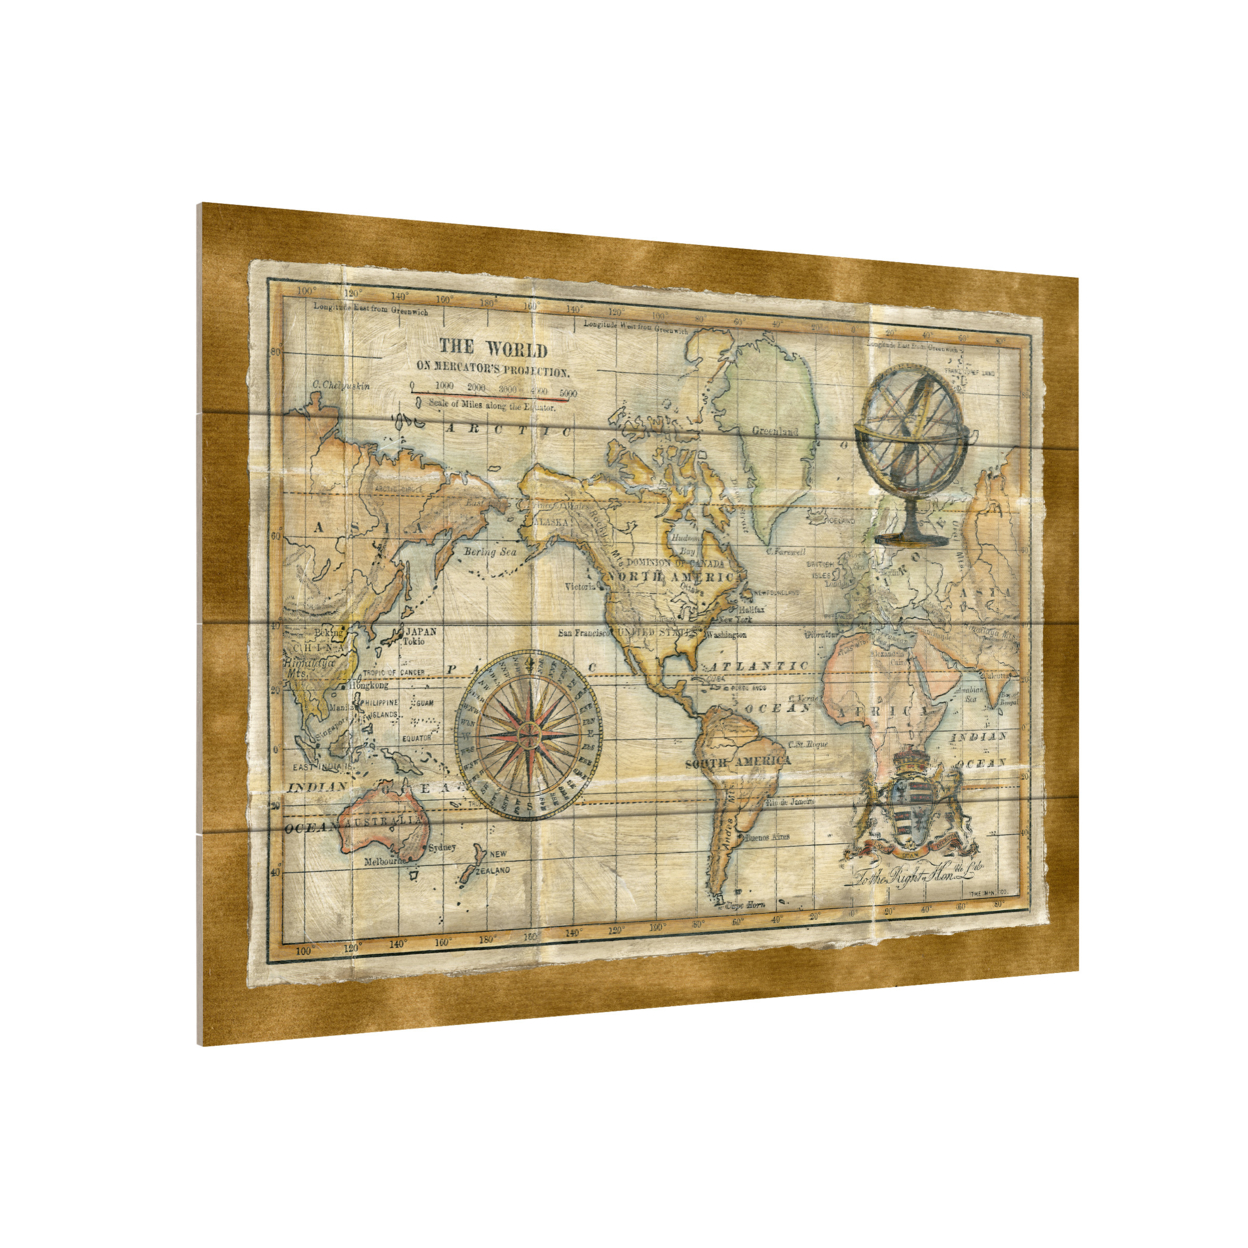 Wall Art 12 X 16 Inches Titled Antique World Map Framed Ready To Hang Printed On Wooden Planks